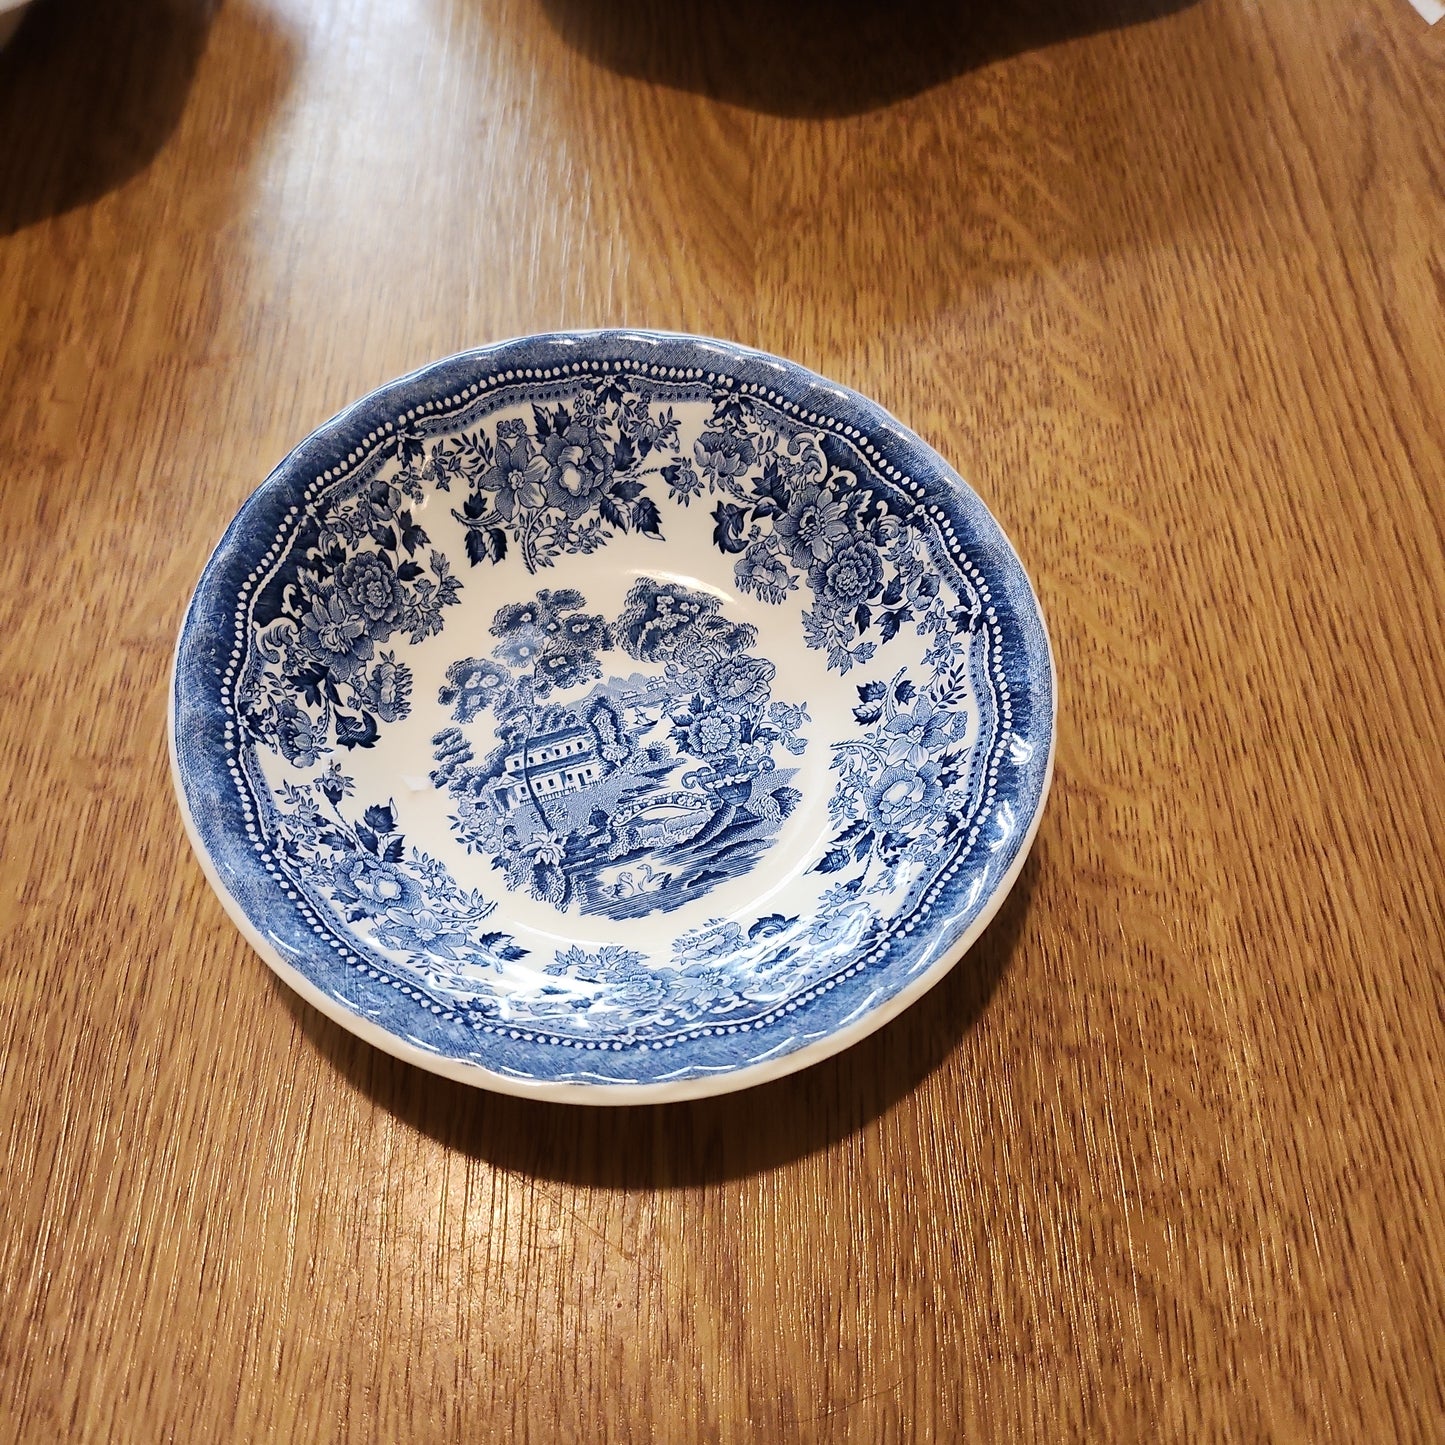 Myott Meakin Blue and white soup bowl